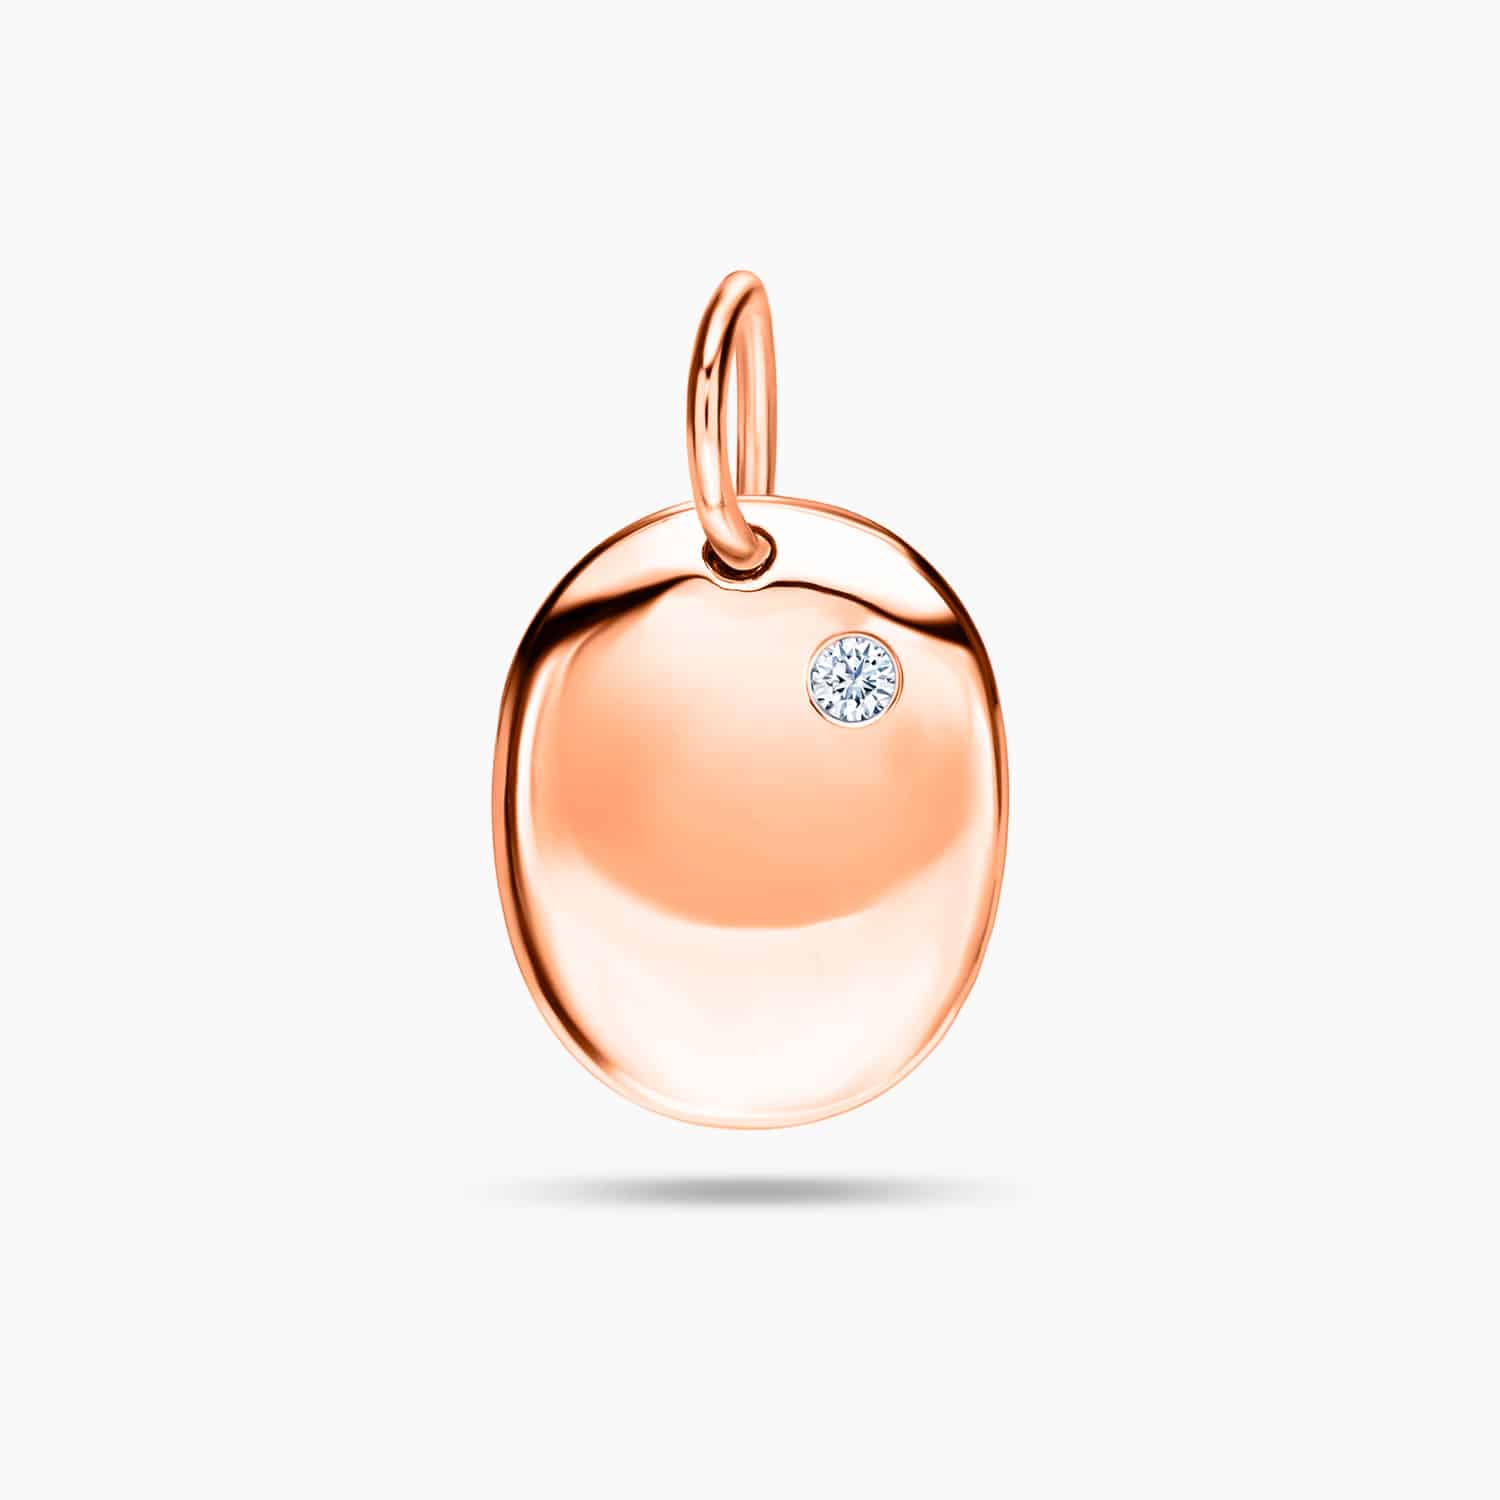 LVC Charmes Pixie Oval Pendant made of 925 Sterling Silver Jewellery Plated in Rose Gold